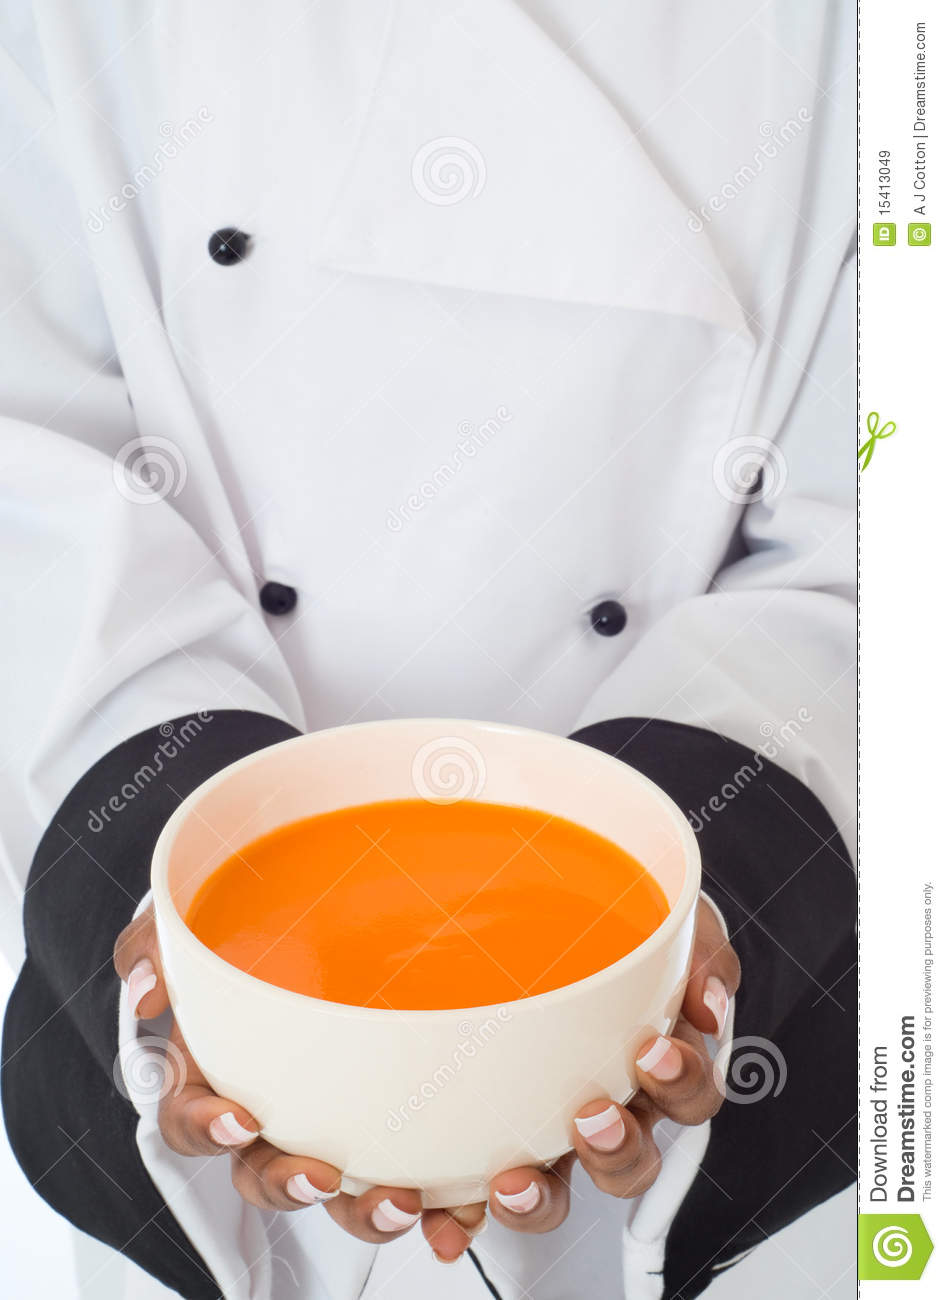 Professional Chef In Work Wear Jacket Serving Soup Isolatated On White    